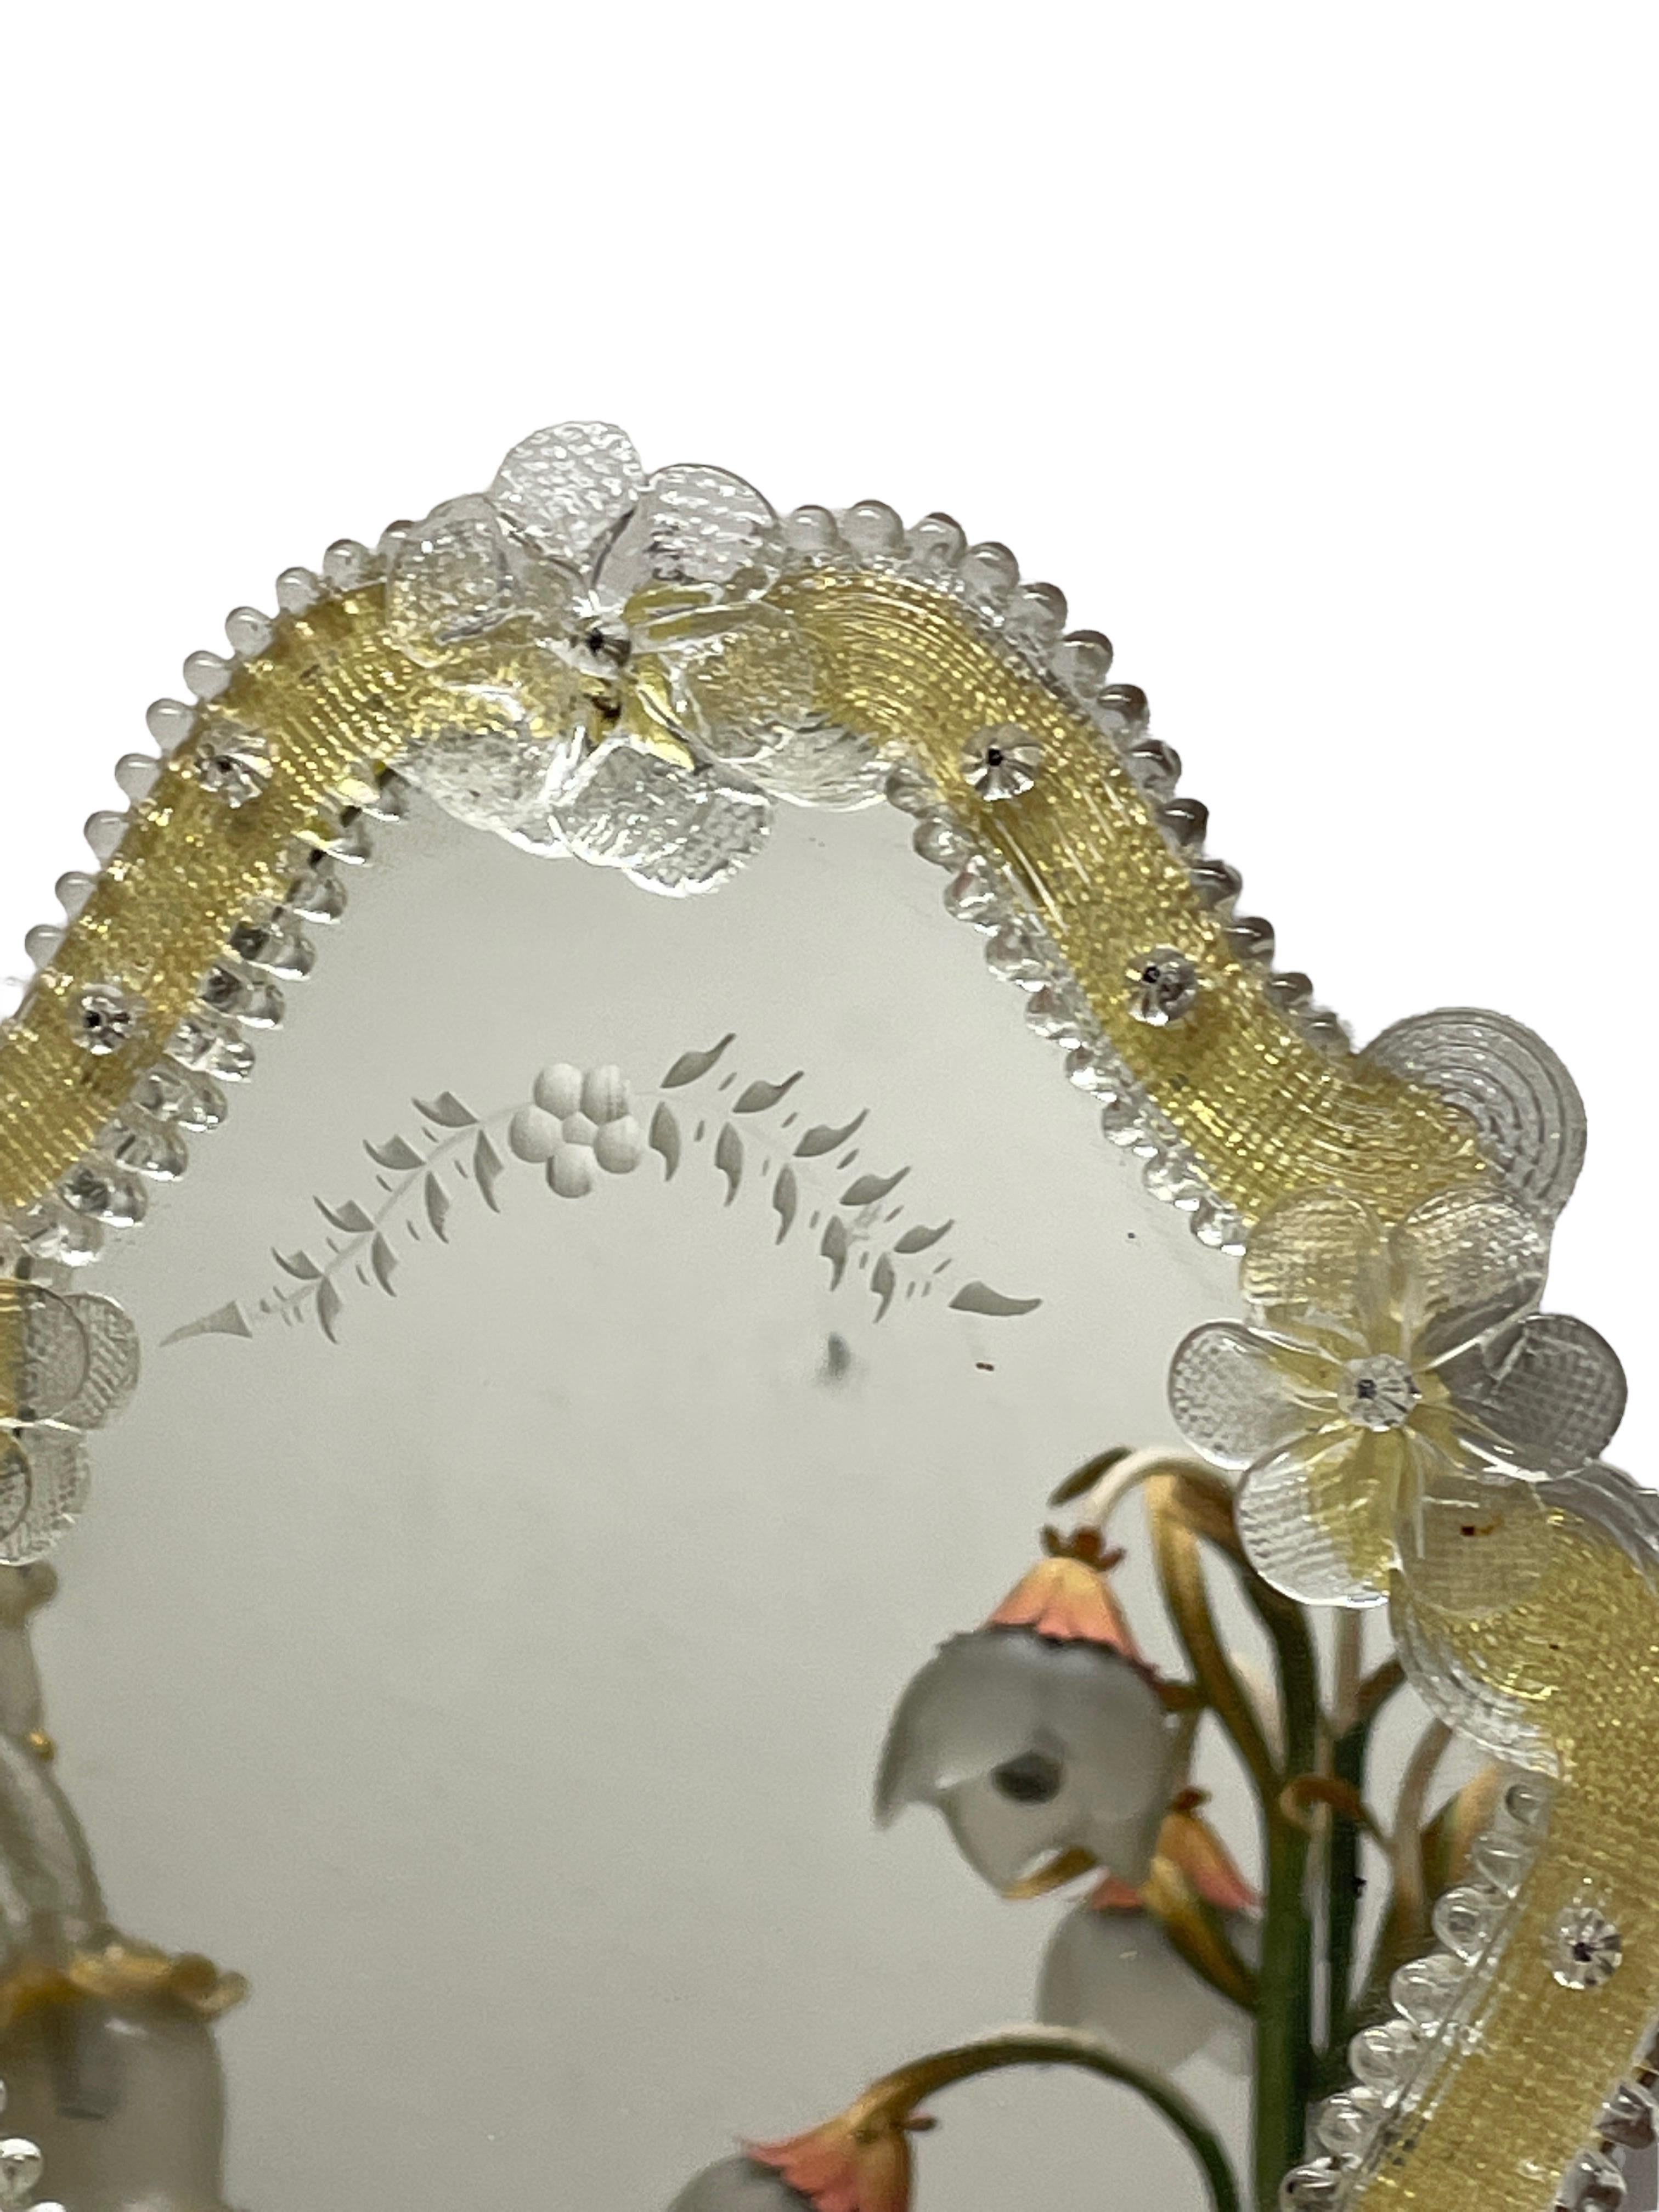 Hand-Crafted Murano Glass Mirror with Flowers 1950s, Italy Venetian Venice For Sale